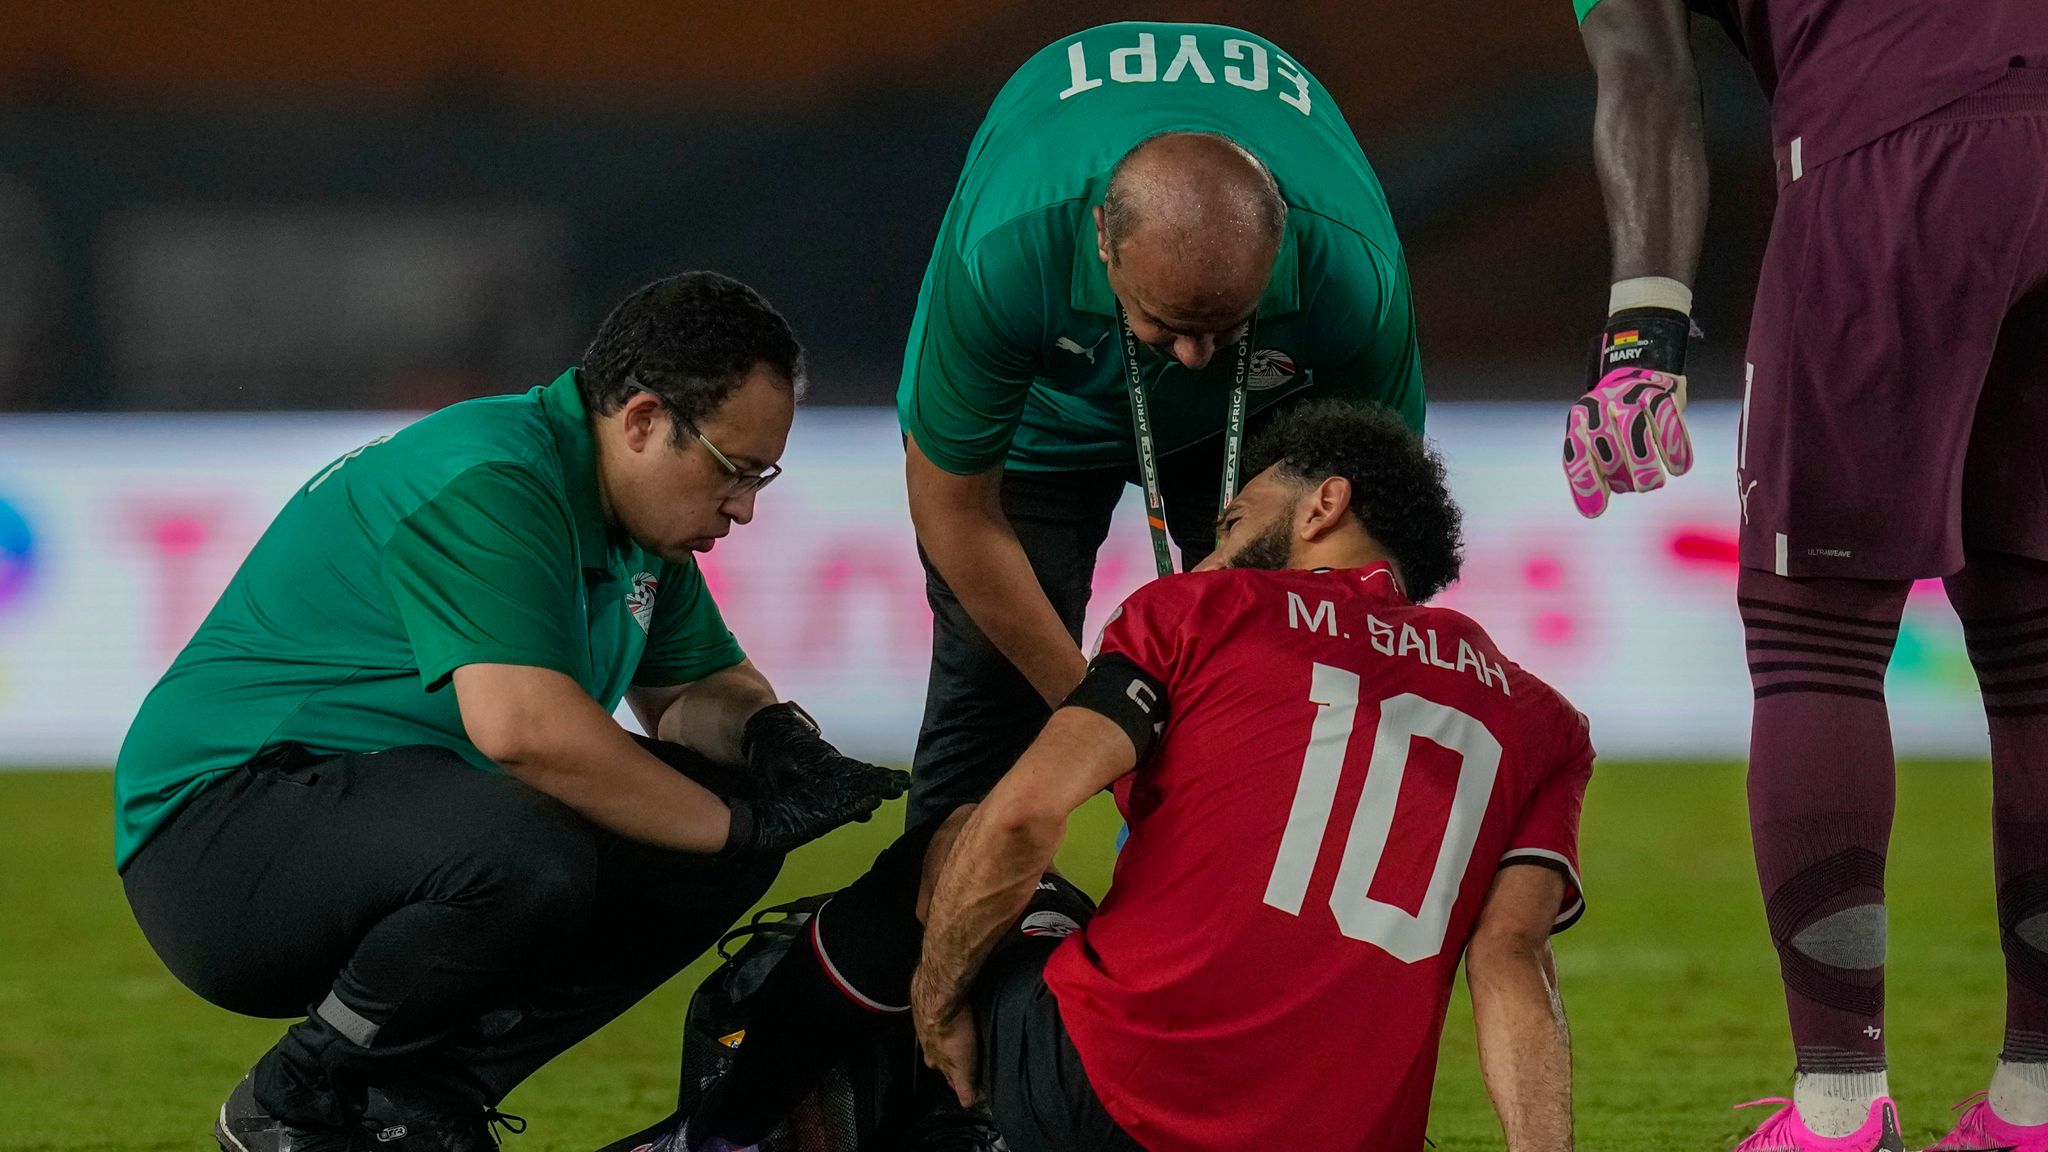 Injury update ahead of Nottingham clash as Liverpool star Mohamed Salah continues to see himself sidelined.